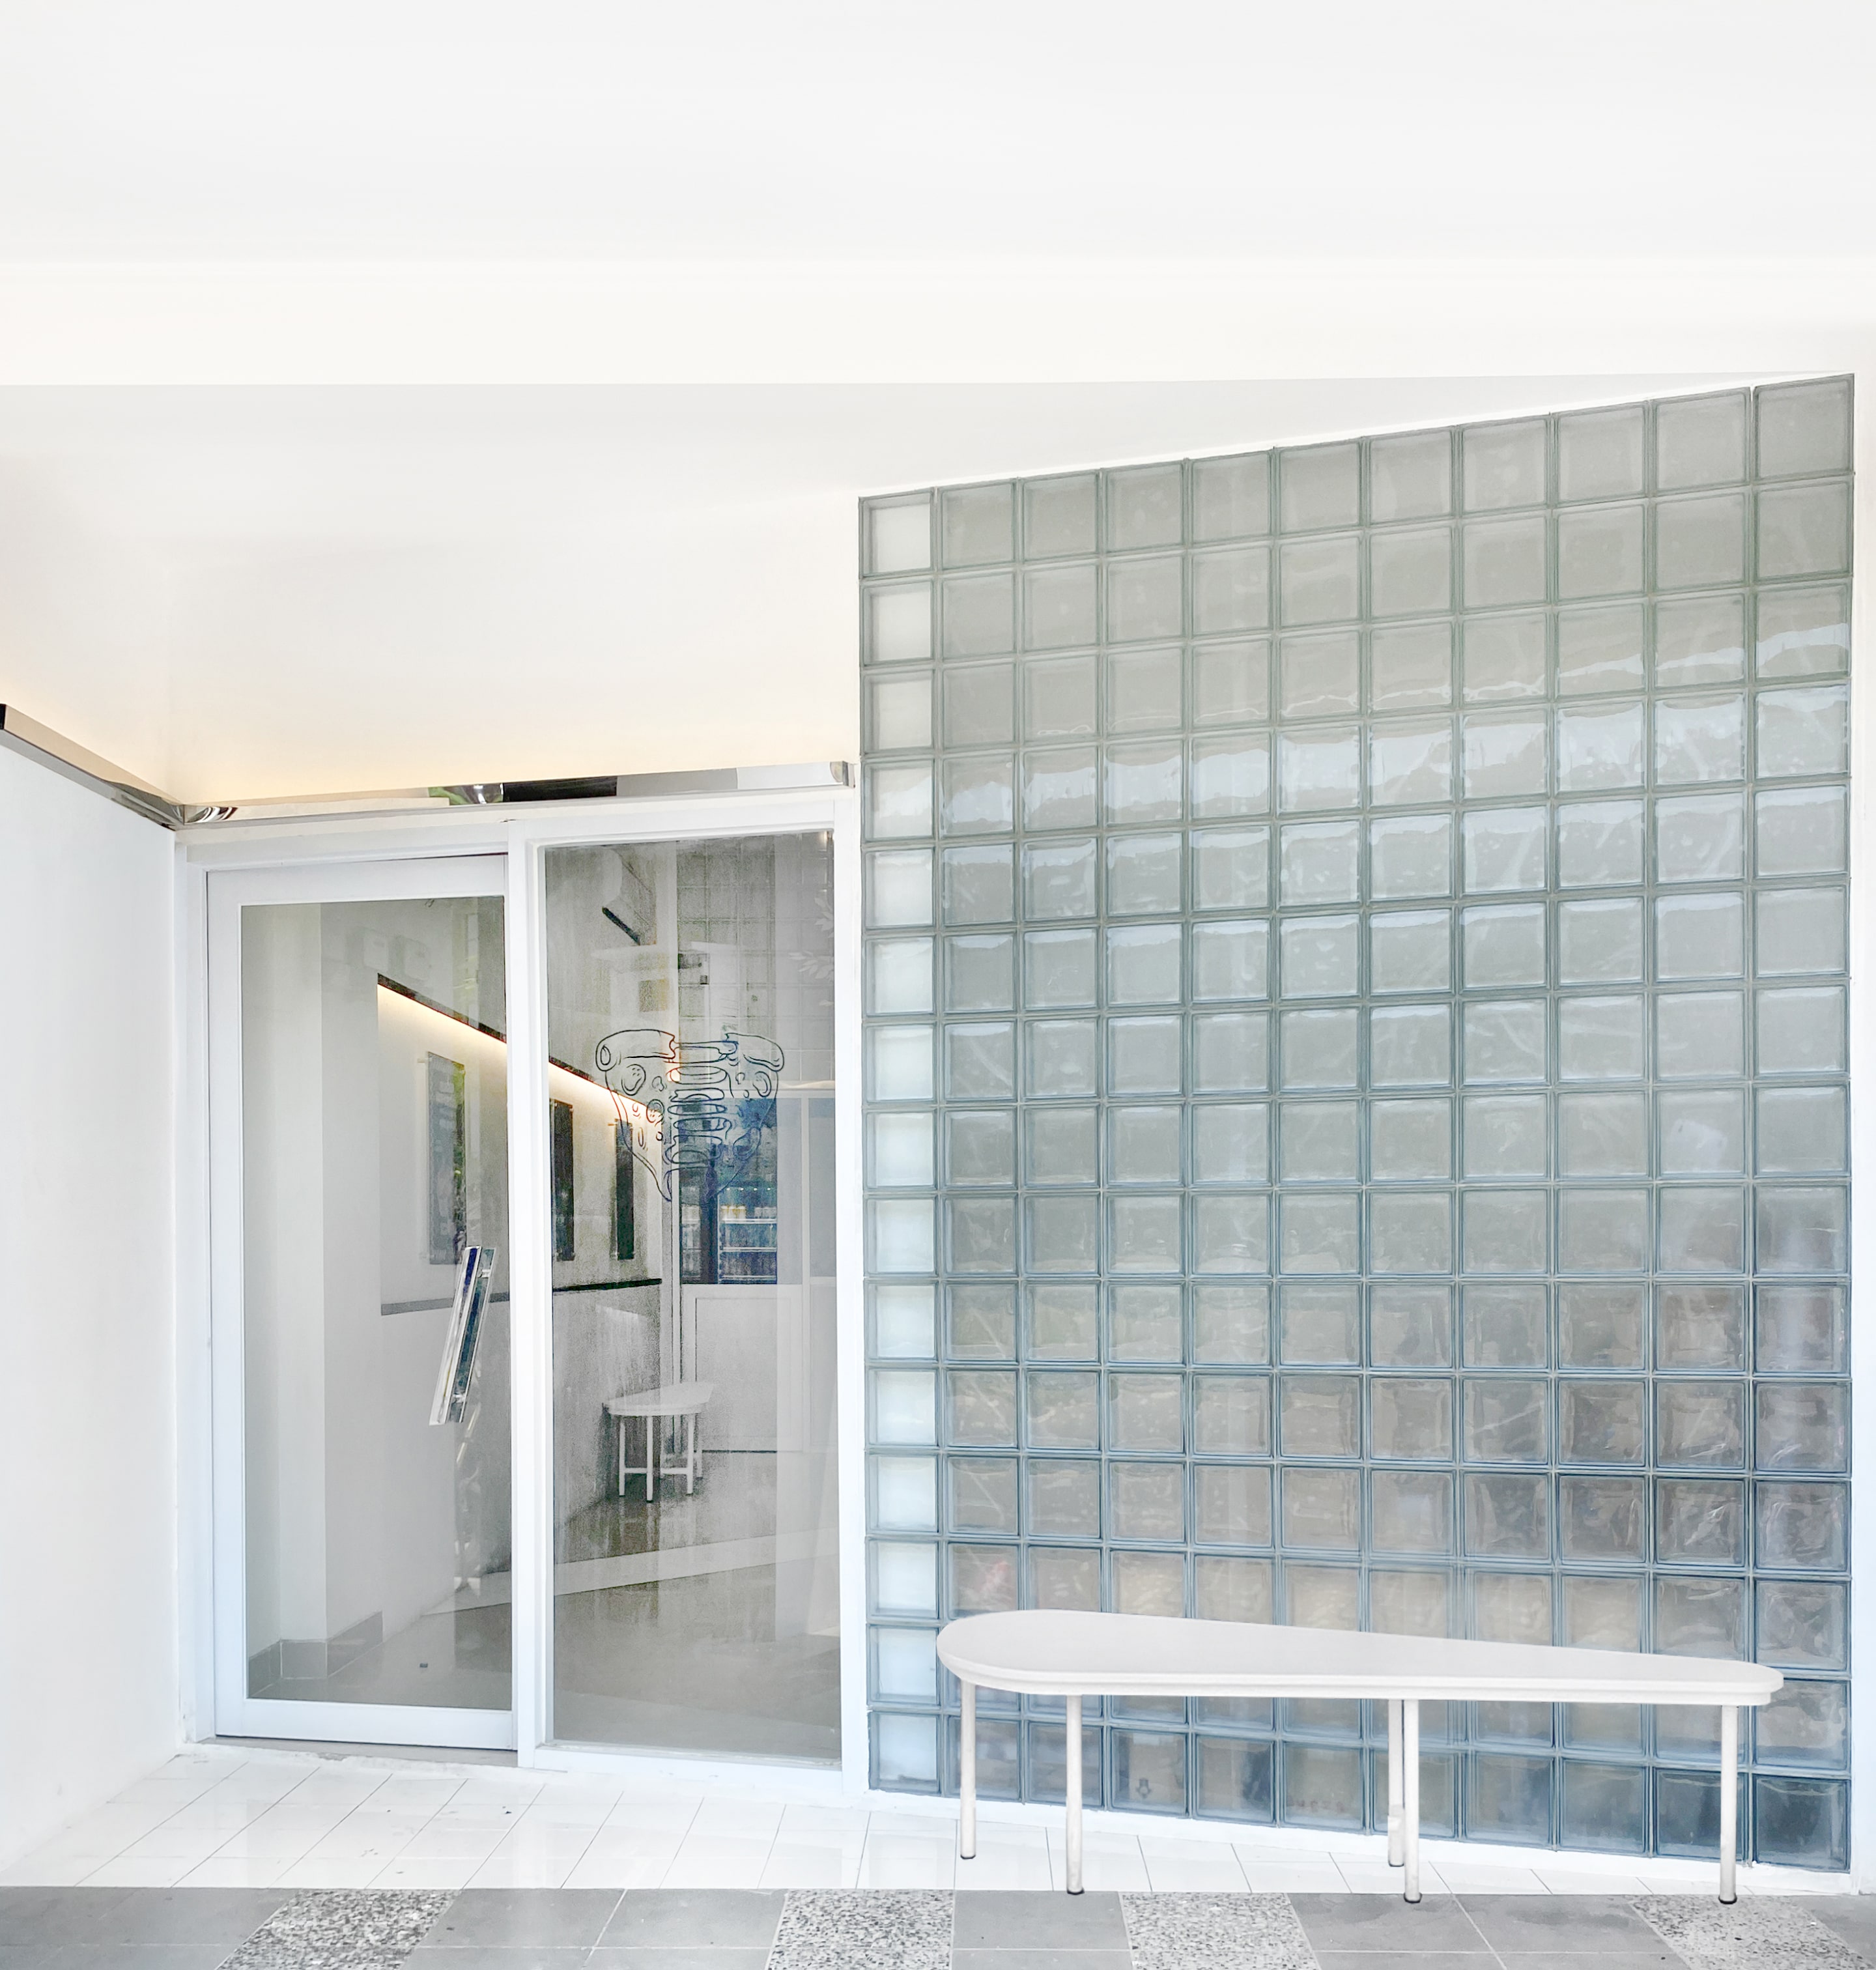 (Minimalist white doors combined with glass blocks can attract the attention of visitors)